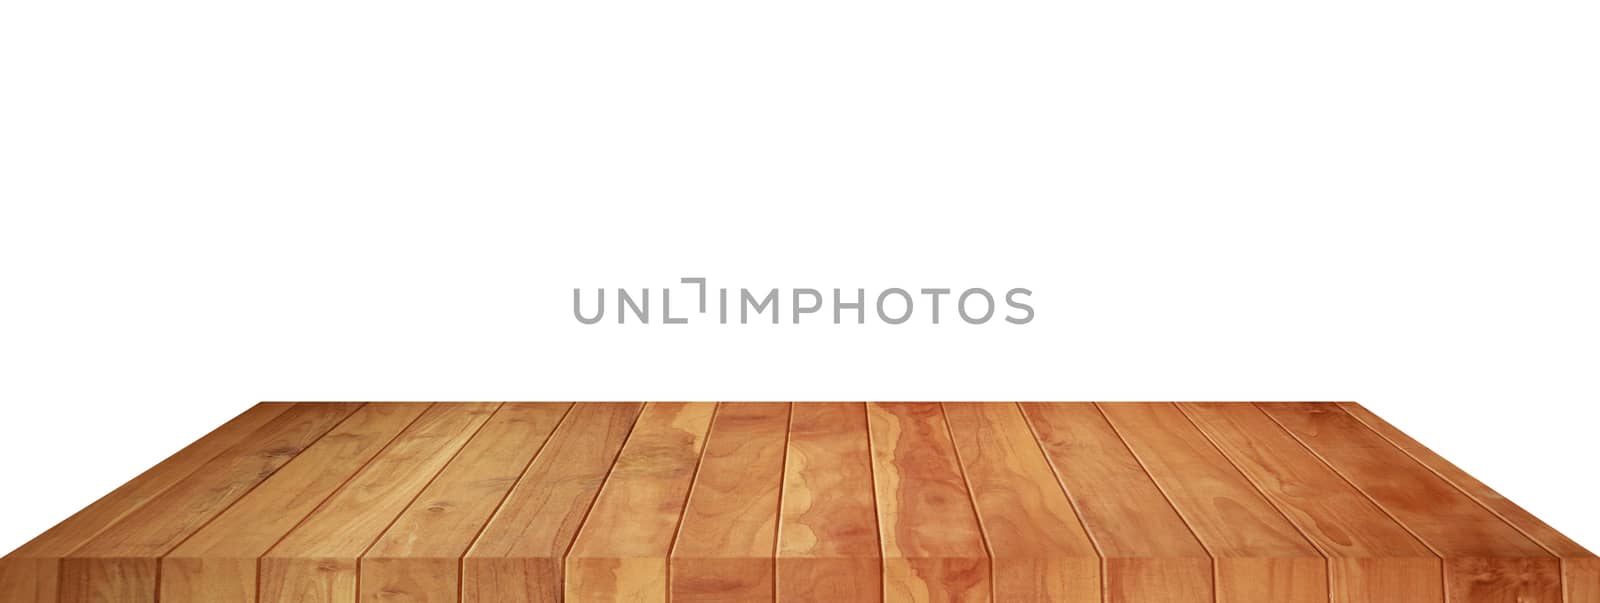 Empty brown wood floor object on a white background by sompongtom